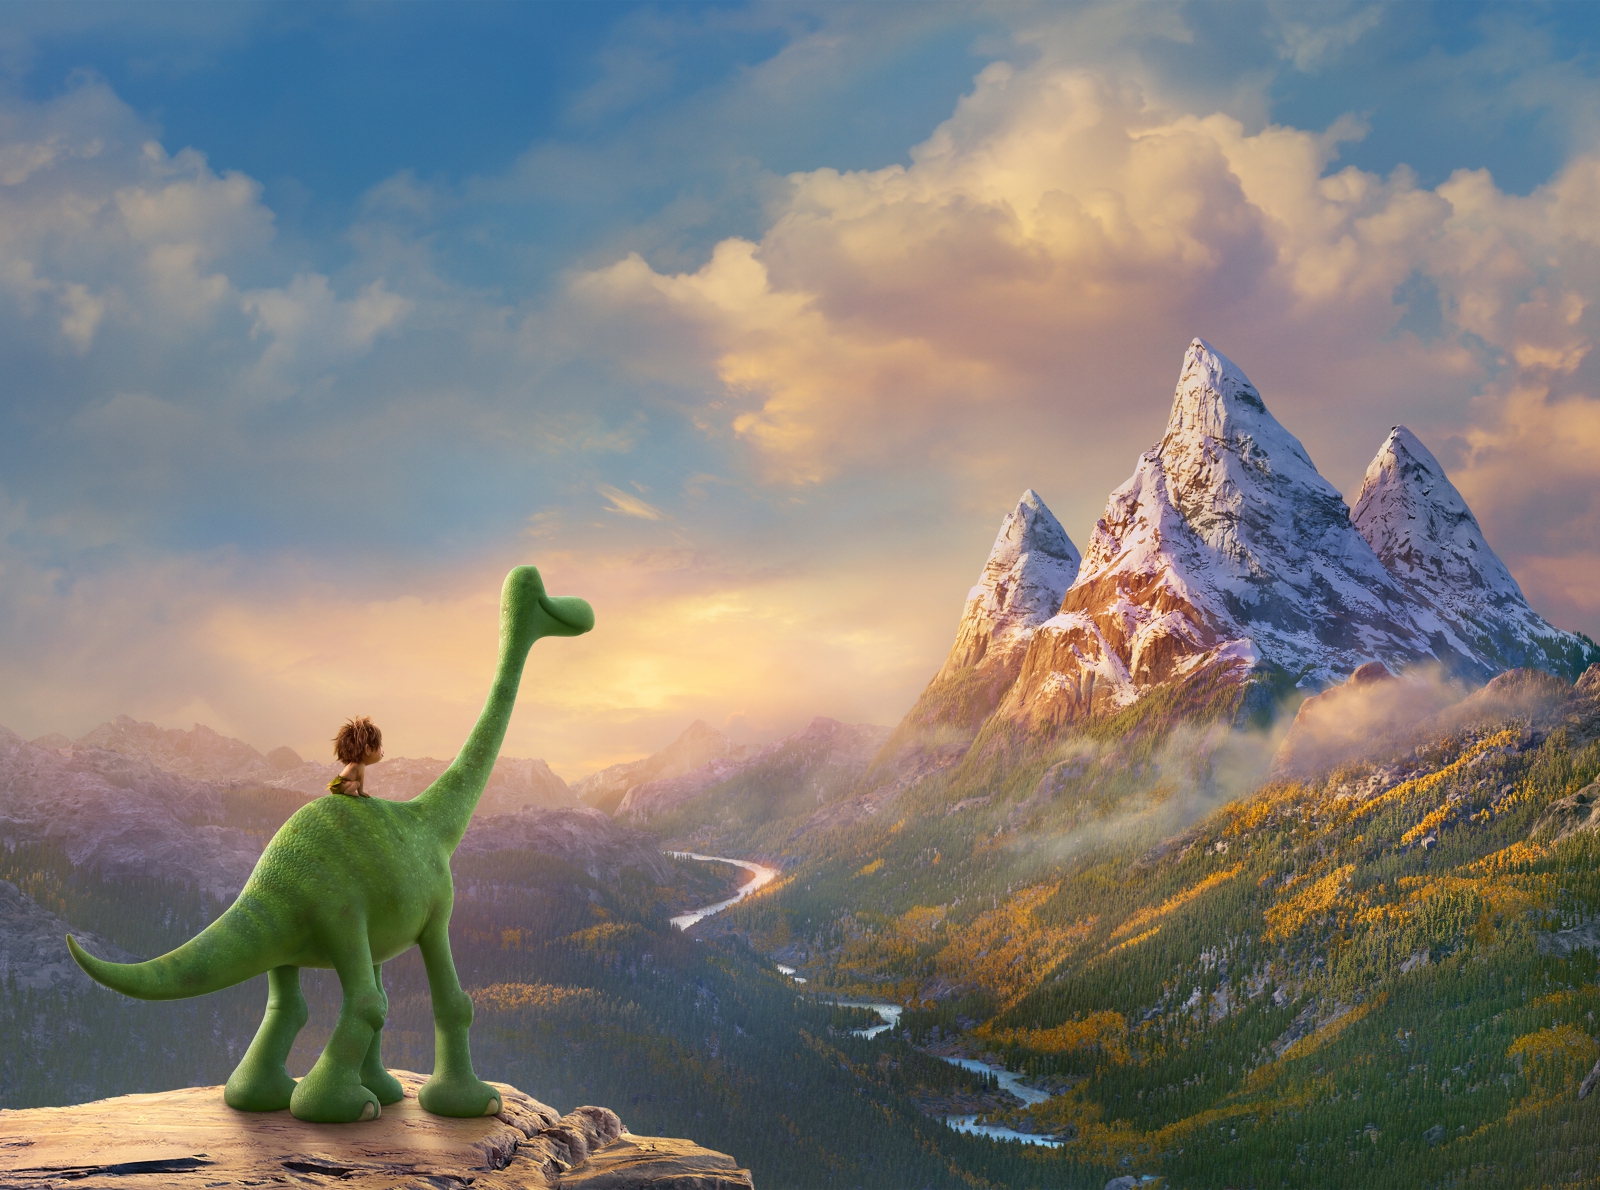 AN UNLIKELY PAIR - In Disney?Pixar's THE GOOD DINOSAUR, Arlo, an Apatosaurus, encounters a human named Spot. Together, they brave an epic journey through a harsh and mysterious landscape. Directed by Peter Sohn, THE GOOD DINOSAUR opens in theaters nationwide Nov. 25, 2015.  ?2015 Disney?Pixar. All Rights Reserved.